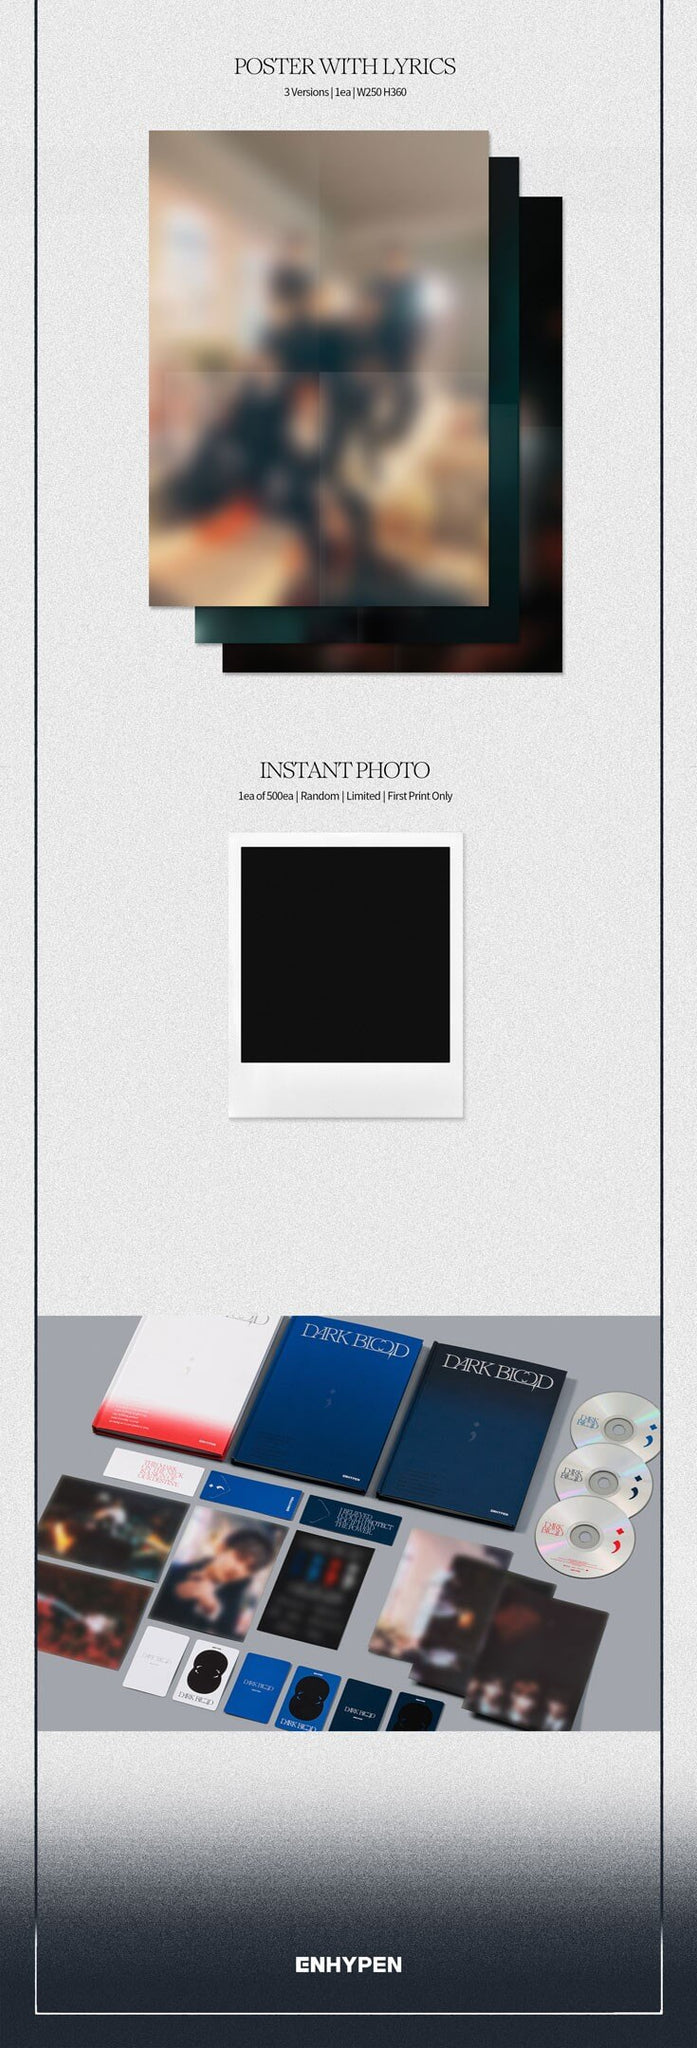 ENHYPEN 4th Mini Album DARK BLOOD Inclusions Poster With Lyrics 1st Press Only Instant Photo